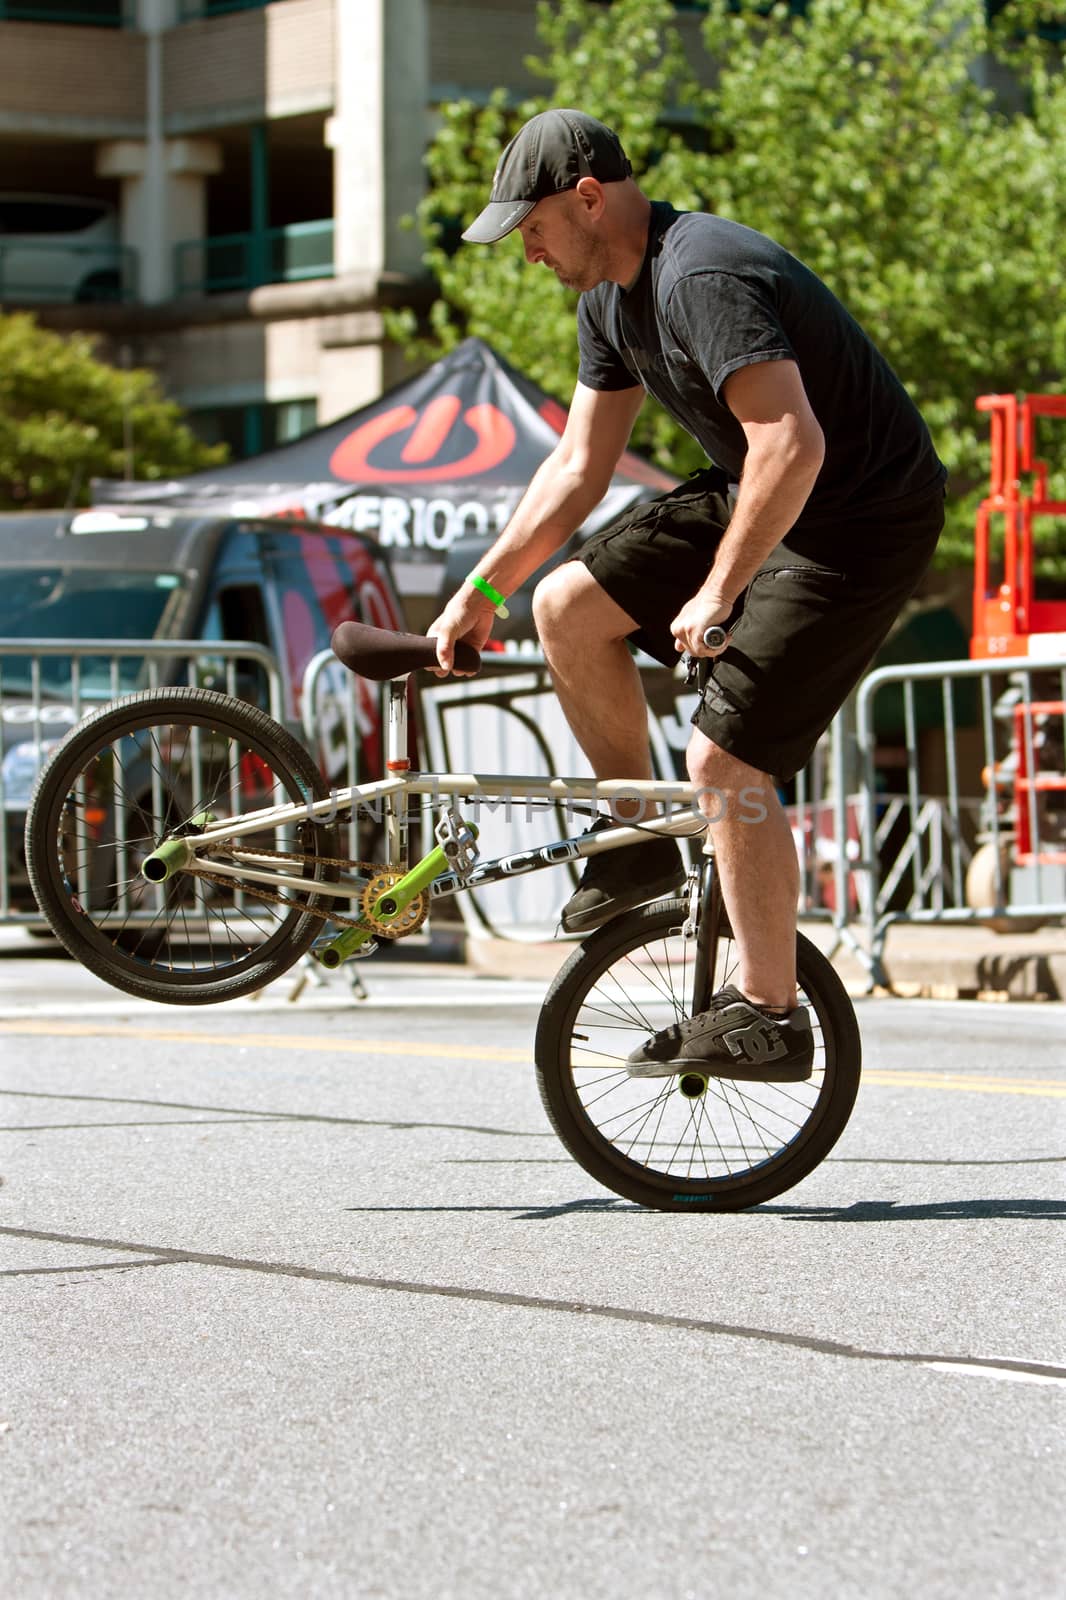 Athens, GA, USA - April 26, 2014:  A man practices his flatland tricks before the start of the BMX Trans Jam competition on the streets of downtown Athens.